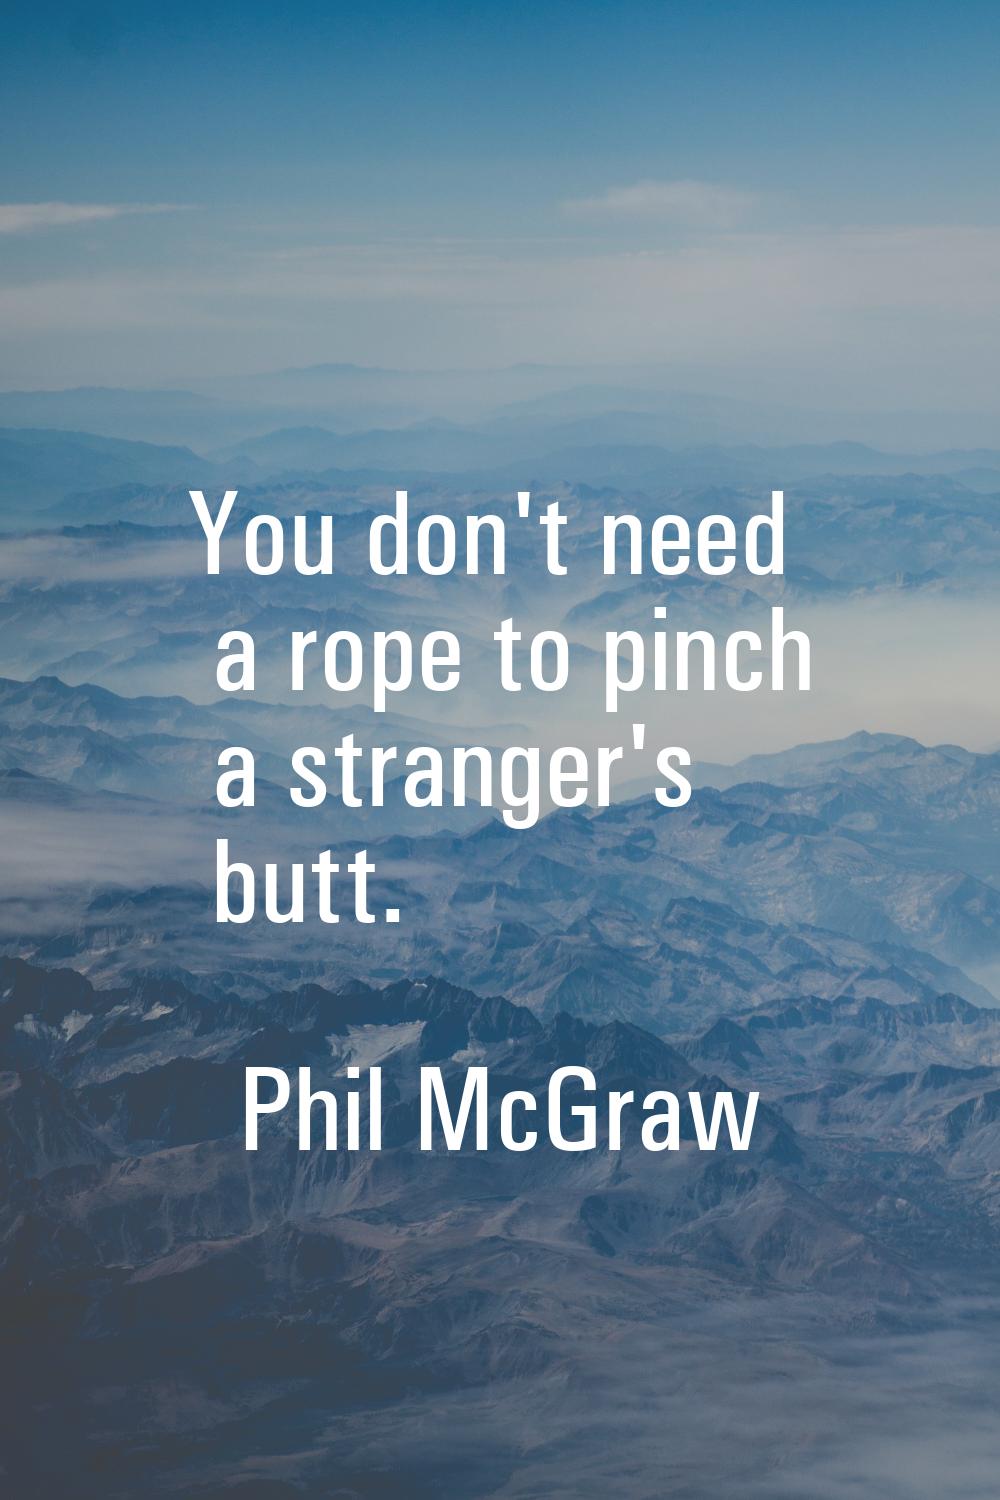 You don't need a rope to pinch a stranger's butt.